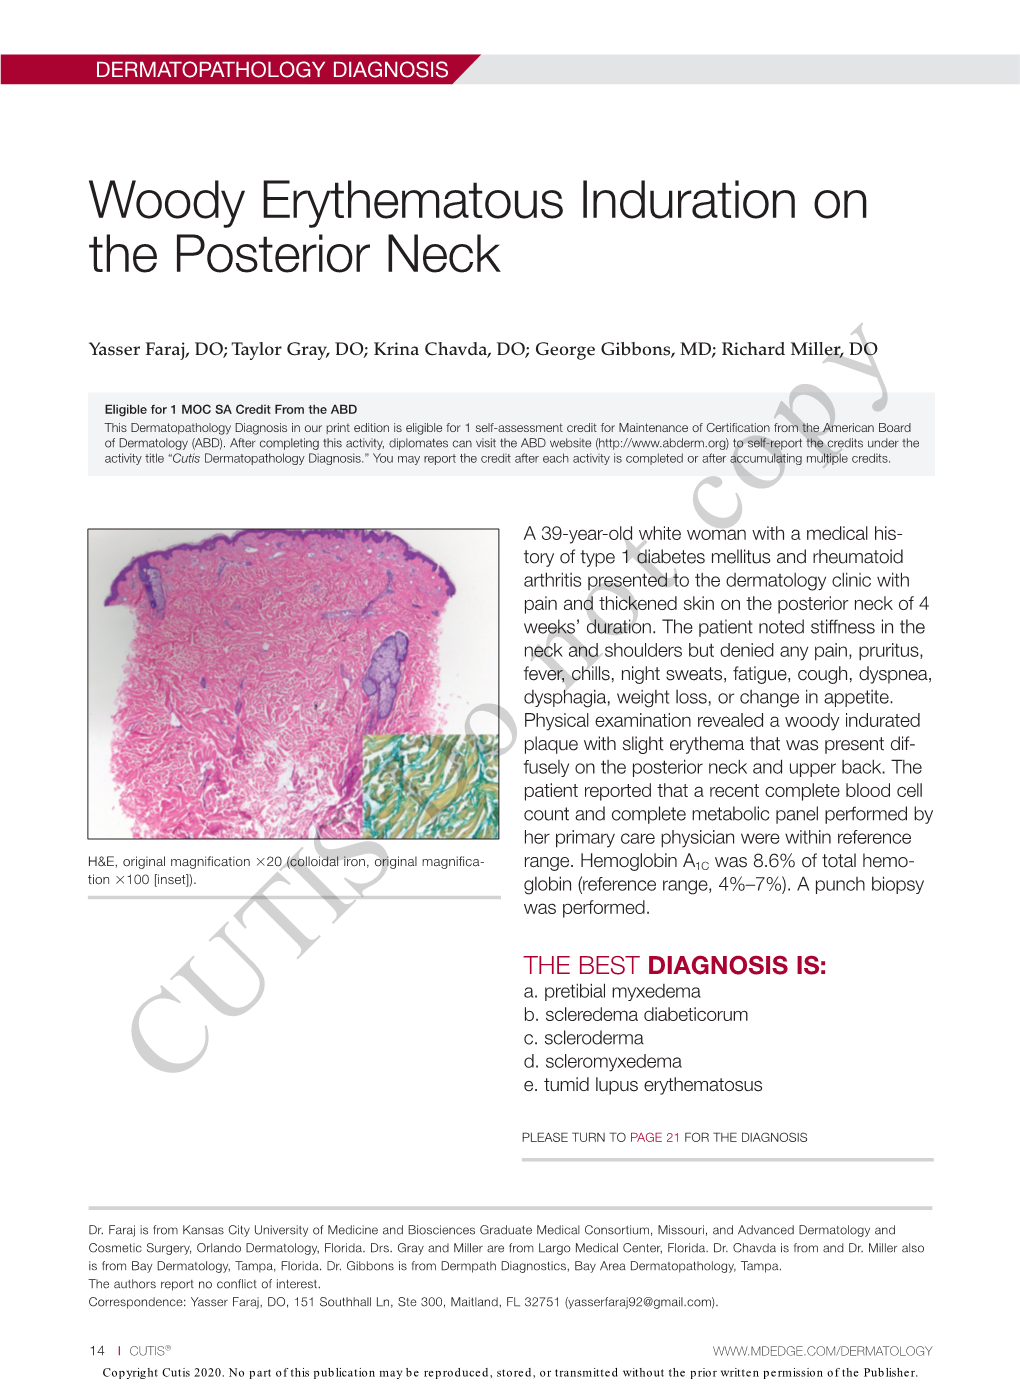 Woody Erythematous Induration on the Posterior Neck